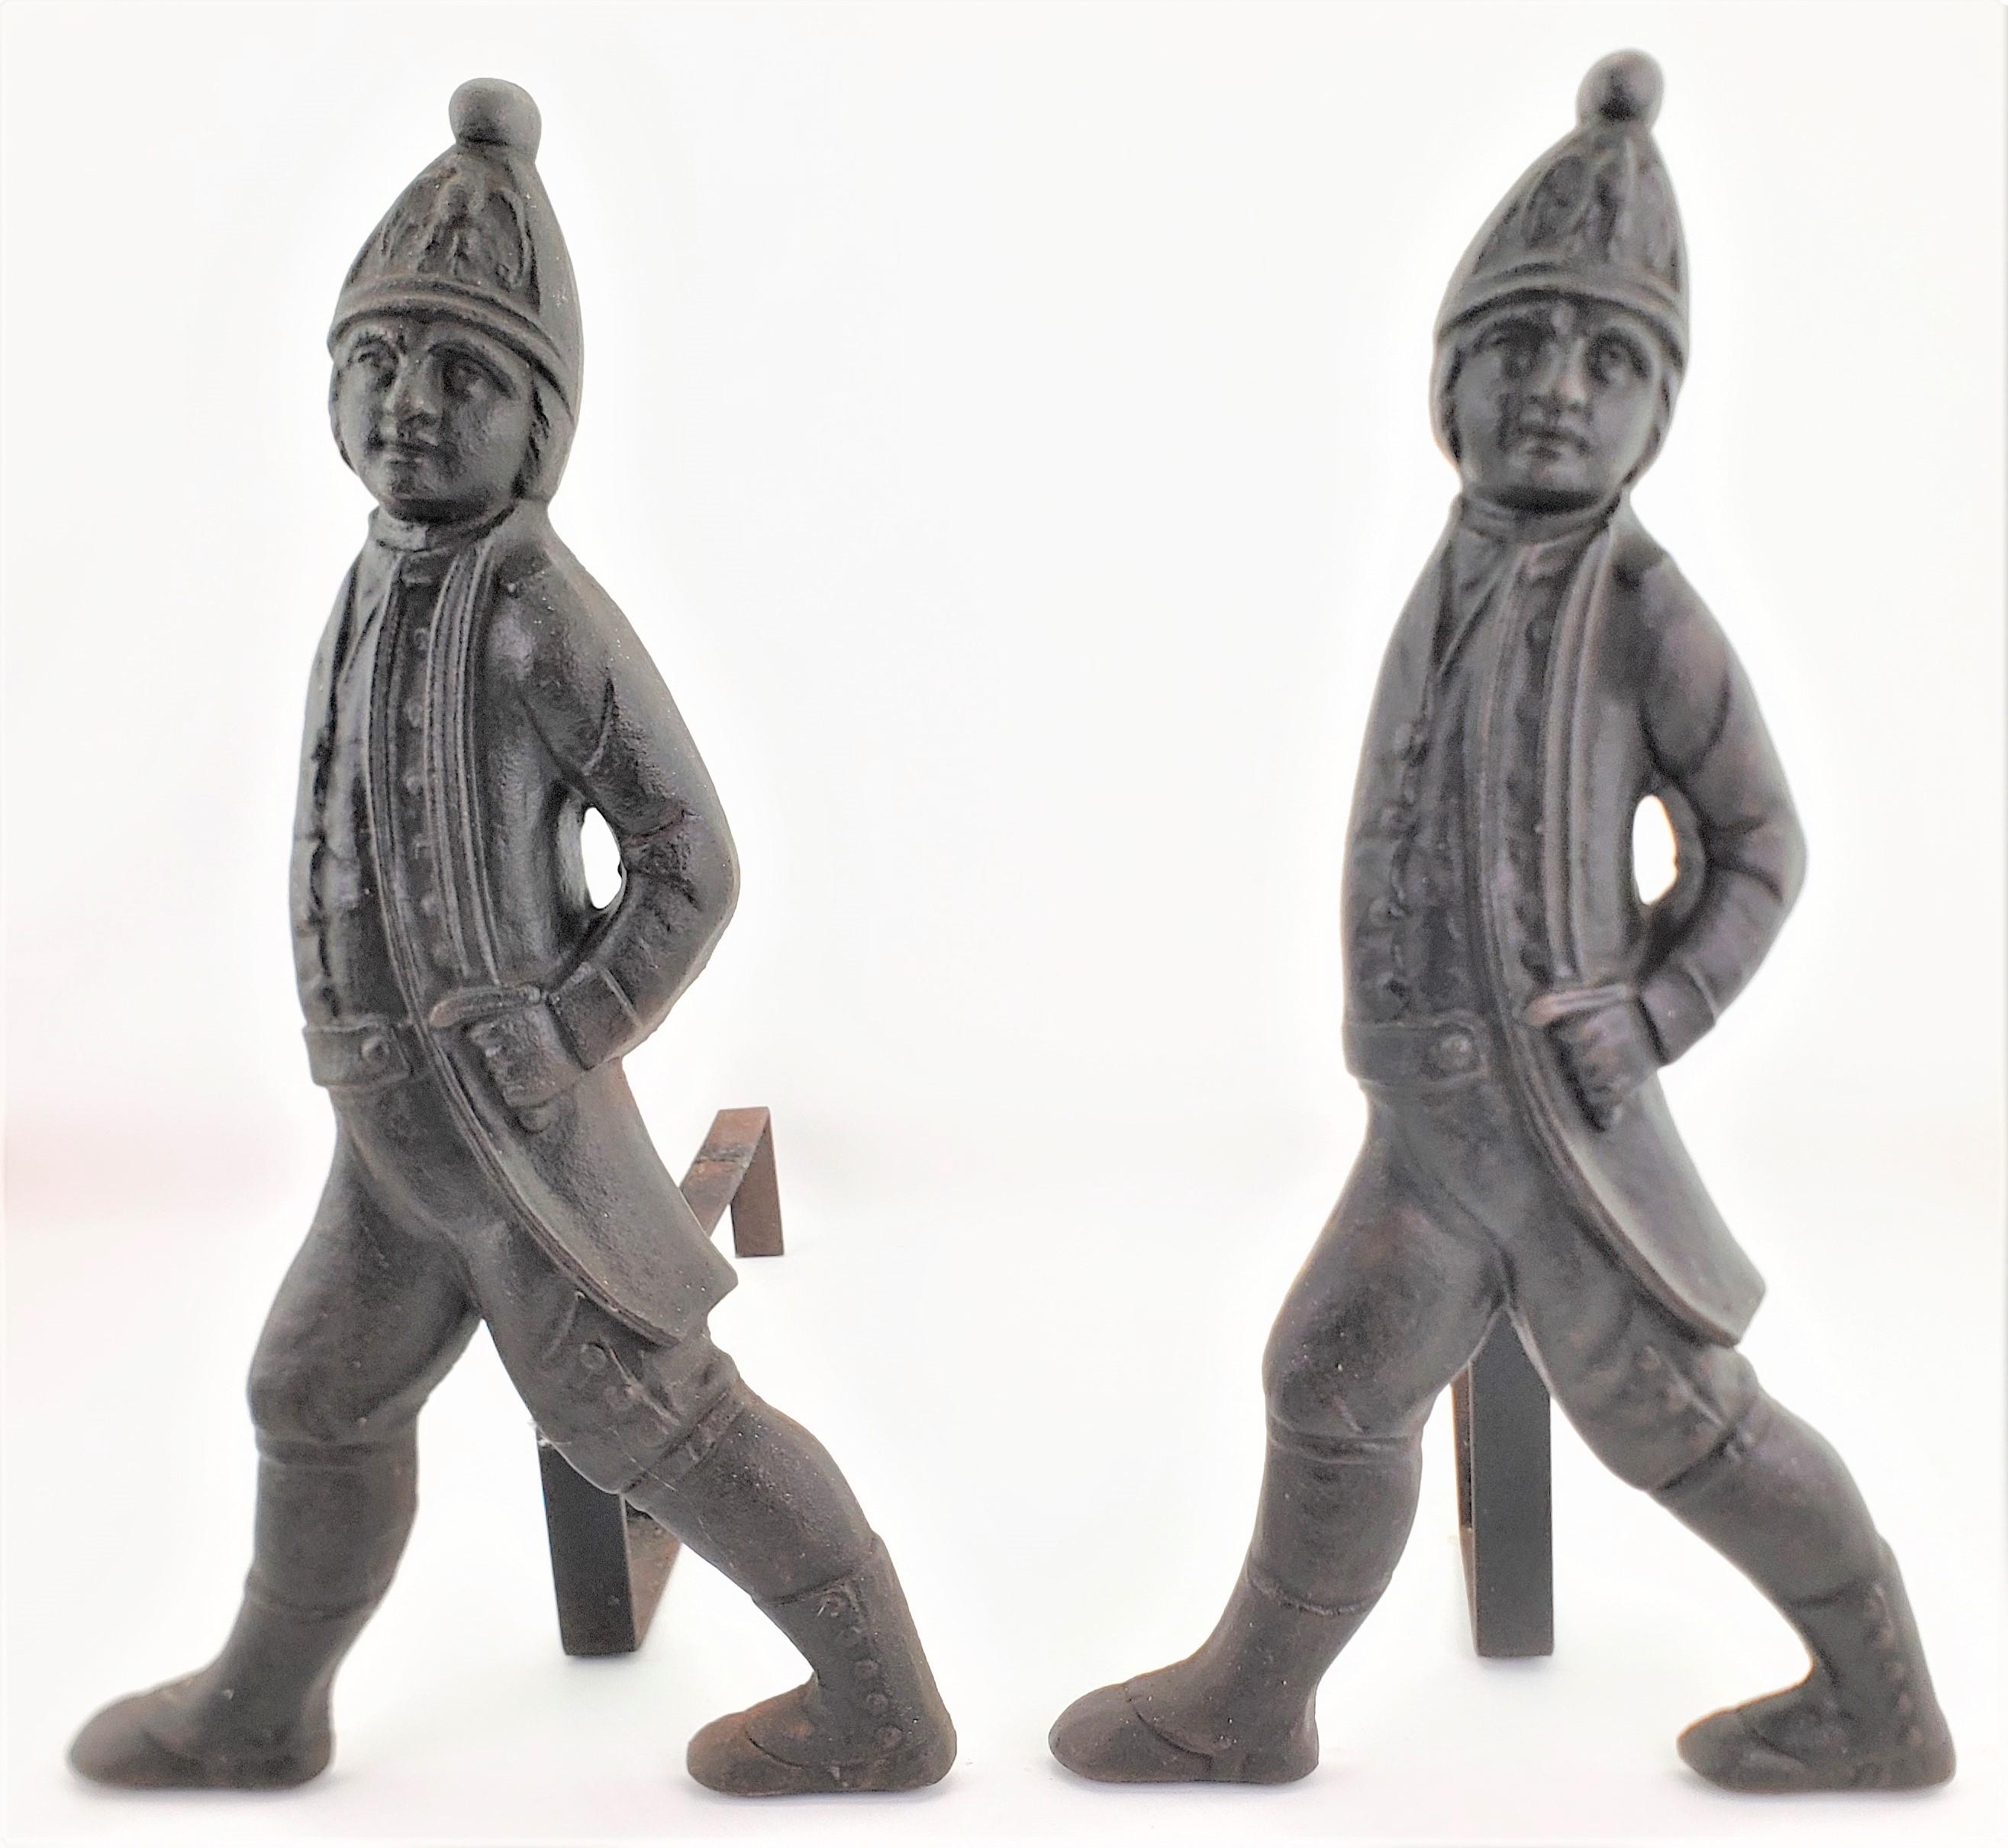 This pair of antique cast metal andirons are unsigned, but likely originate from Europe dating to approximately 1880 and done in the period Victorian style. The fronts of the andirons are cast figural soldiers in full regalia and are supported by